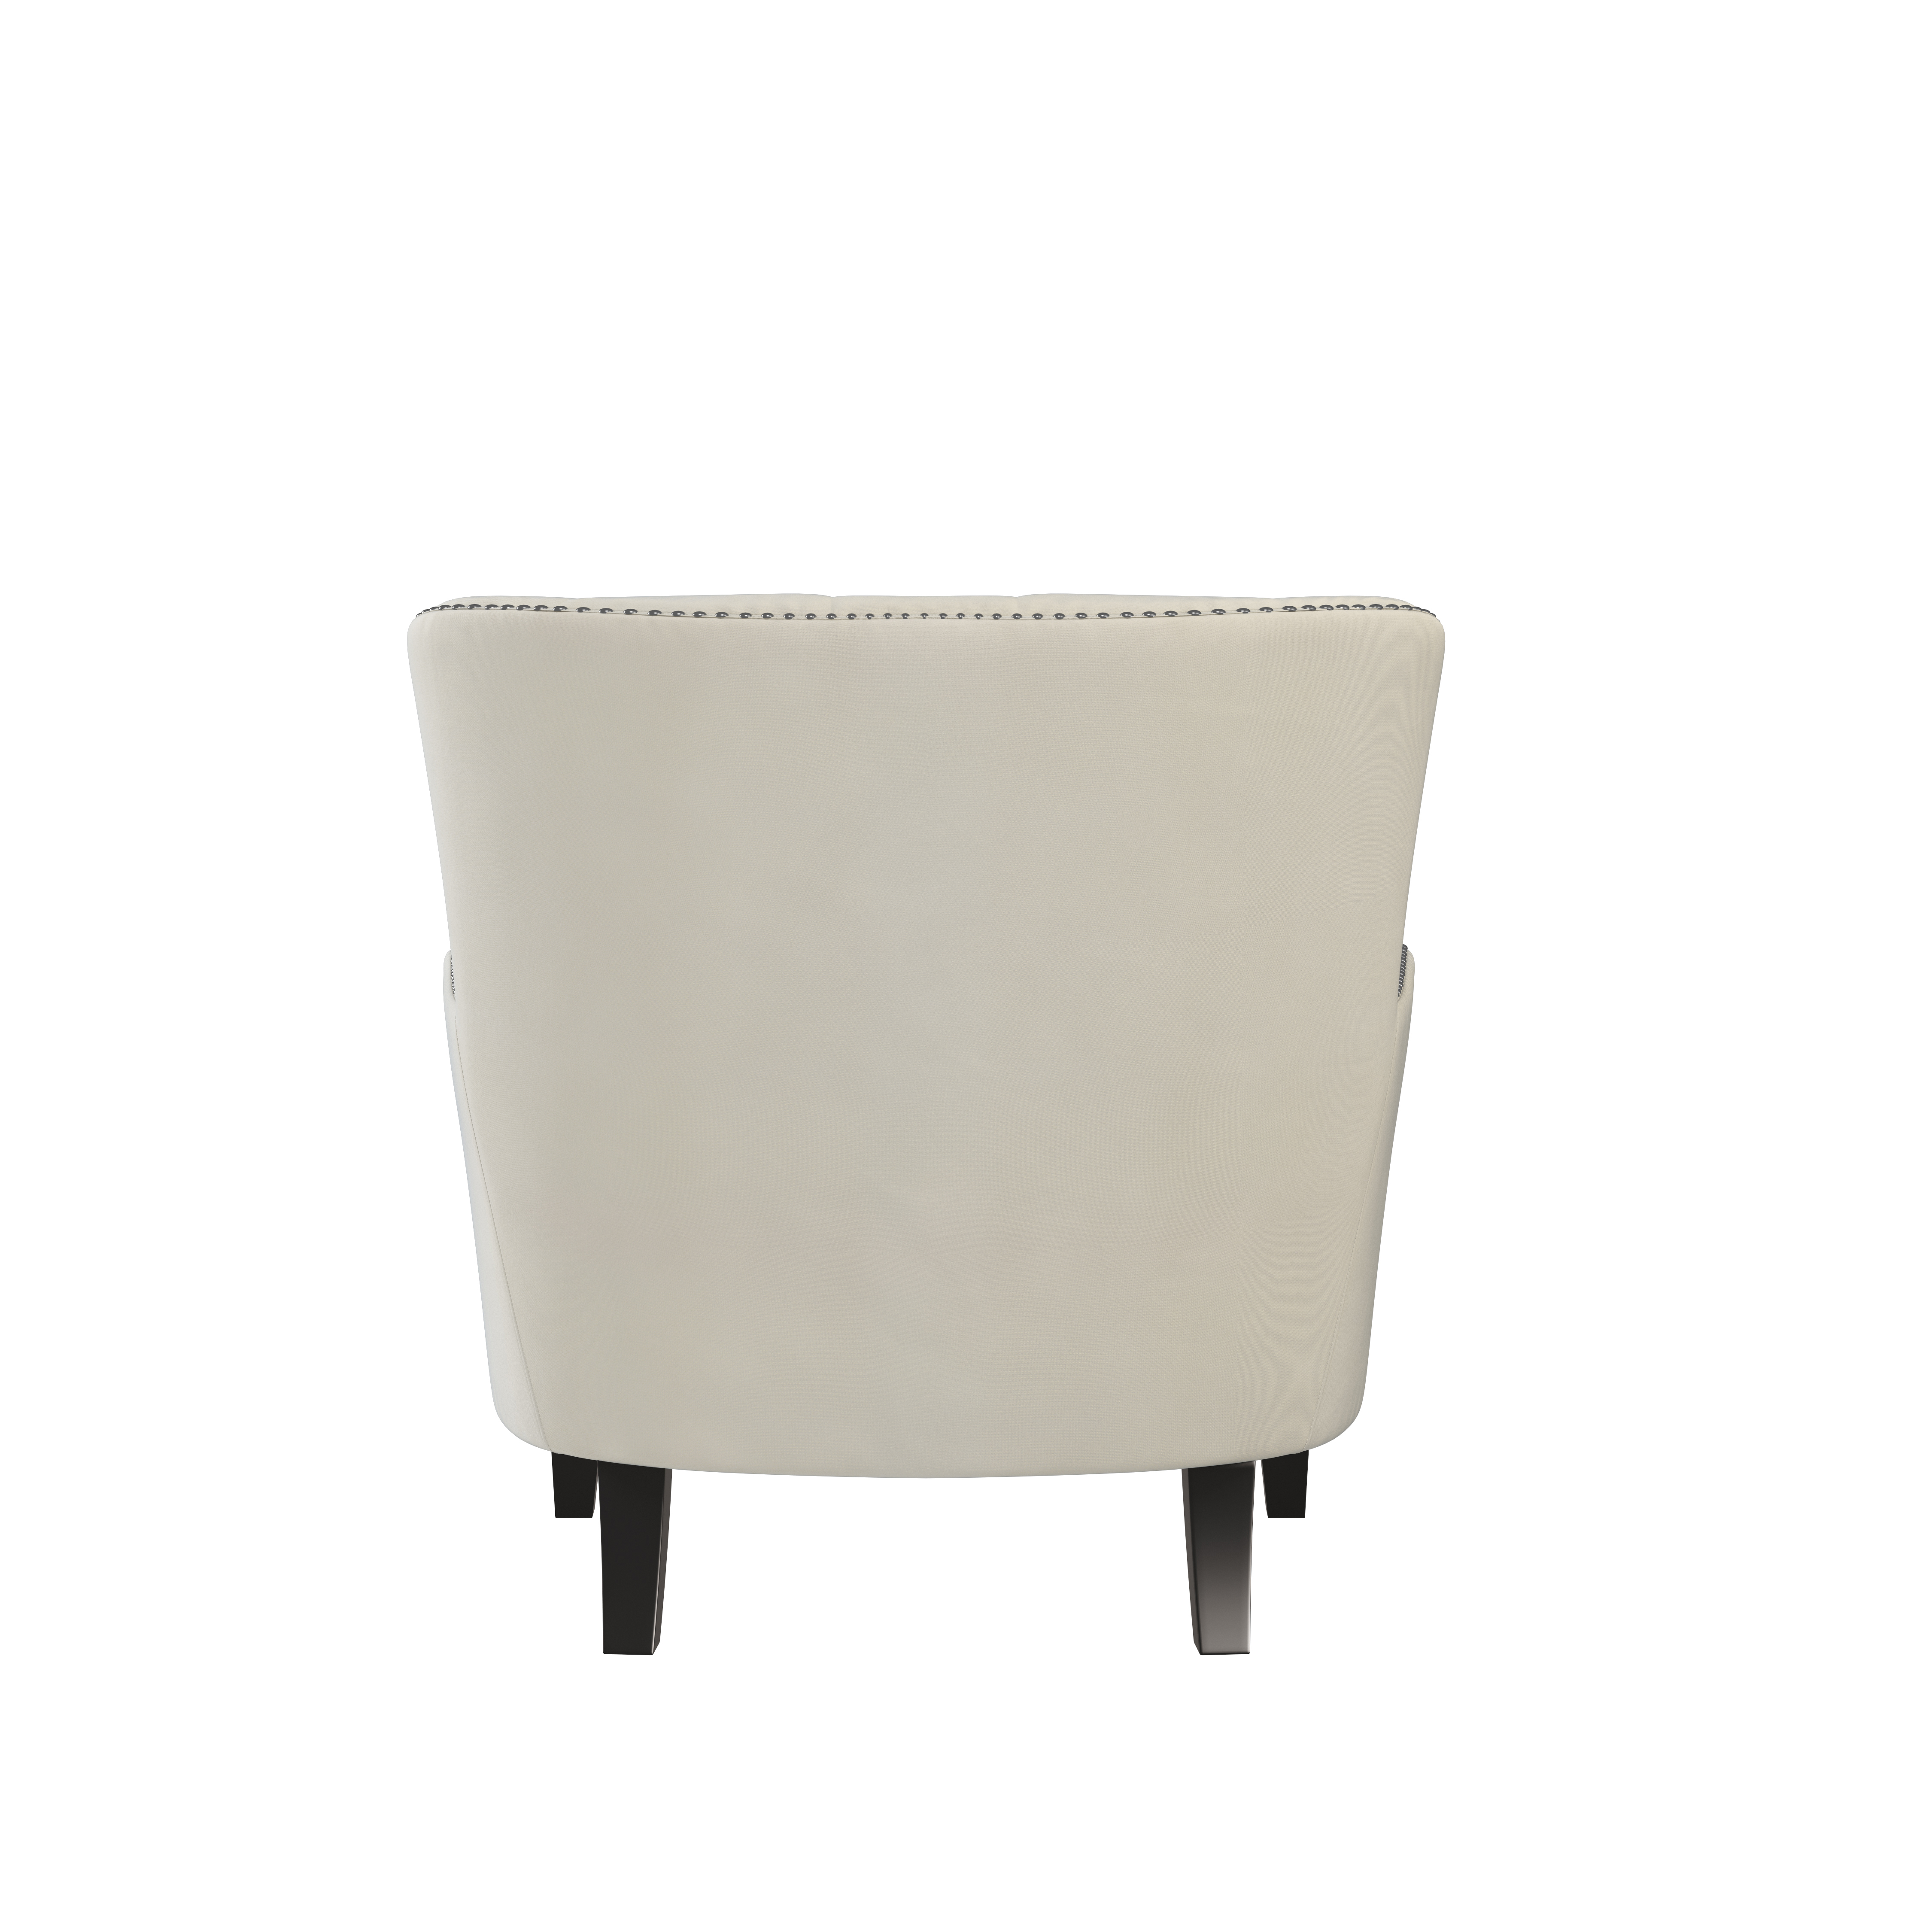 Lifestyle Solutions Lille Wingback Chair, Cream Fabric - image 3 of 9